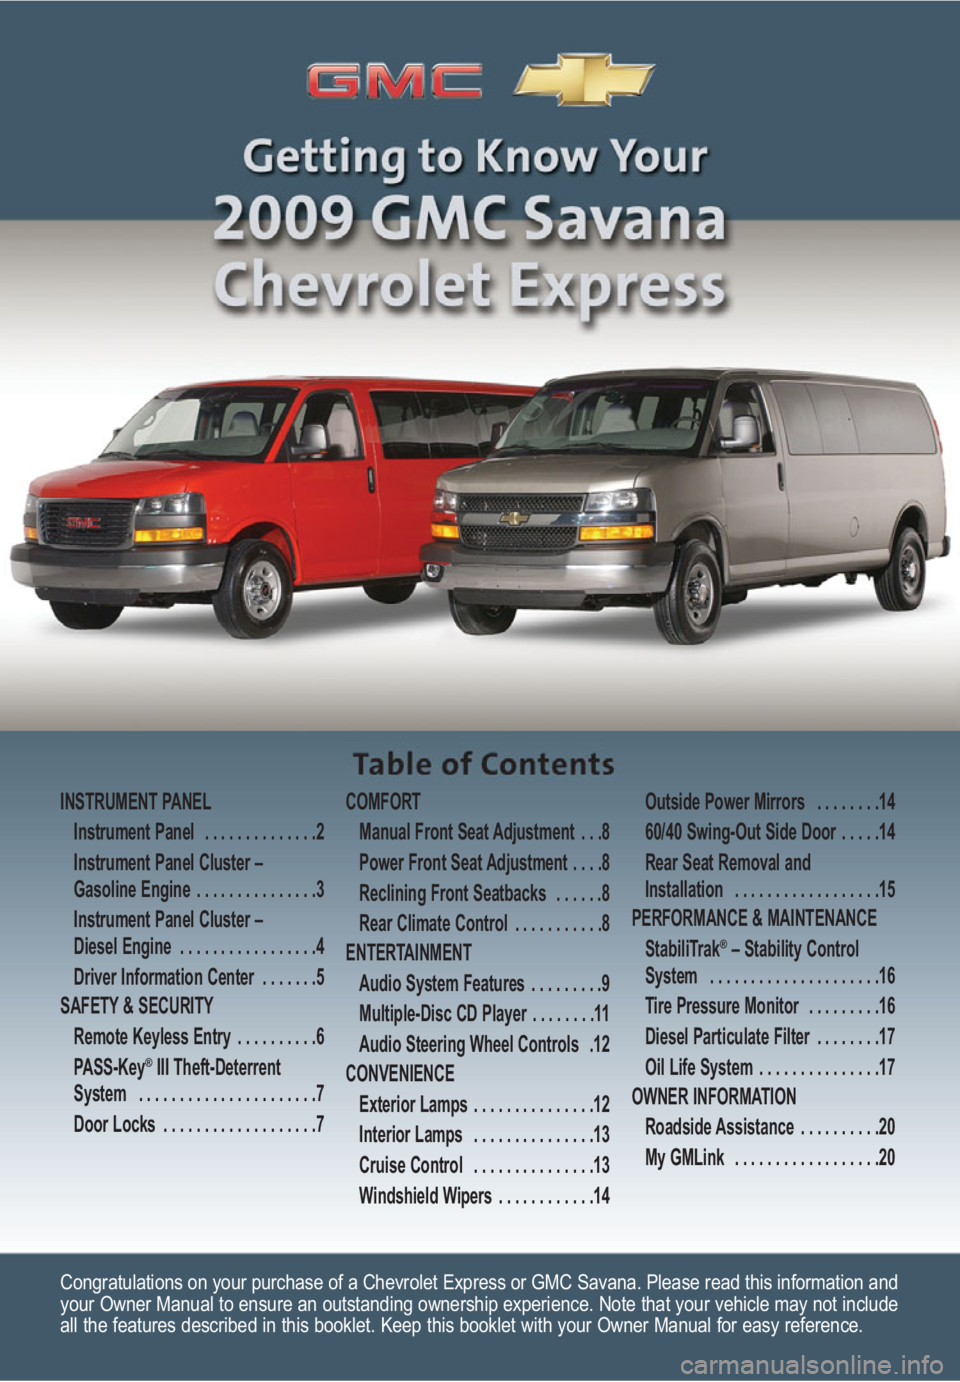 GMC SAVANA 2009  Get To Know Guide Congratulations on your purchase of a Chevrolet Express or GMC Savana. Please read this information and
your Owner Manual to ensure an outstanding ownership experience. Note that your vehicle may not 